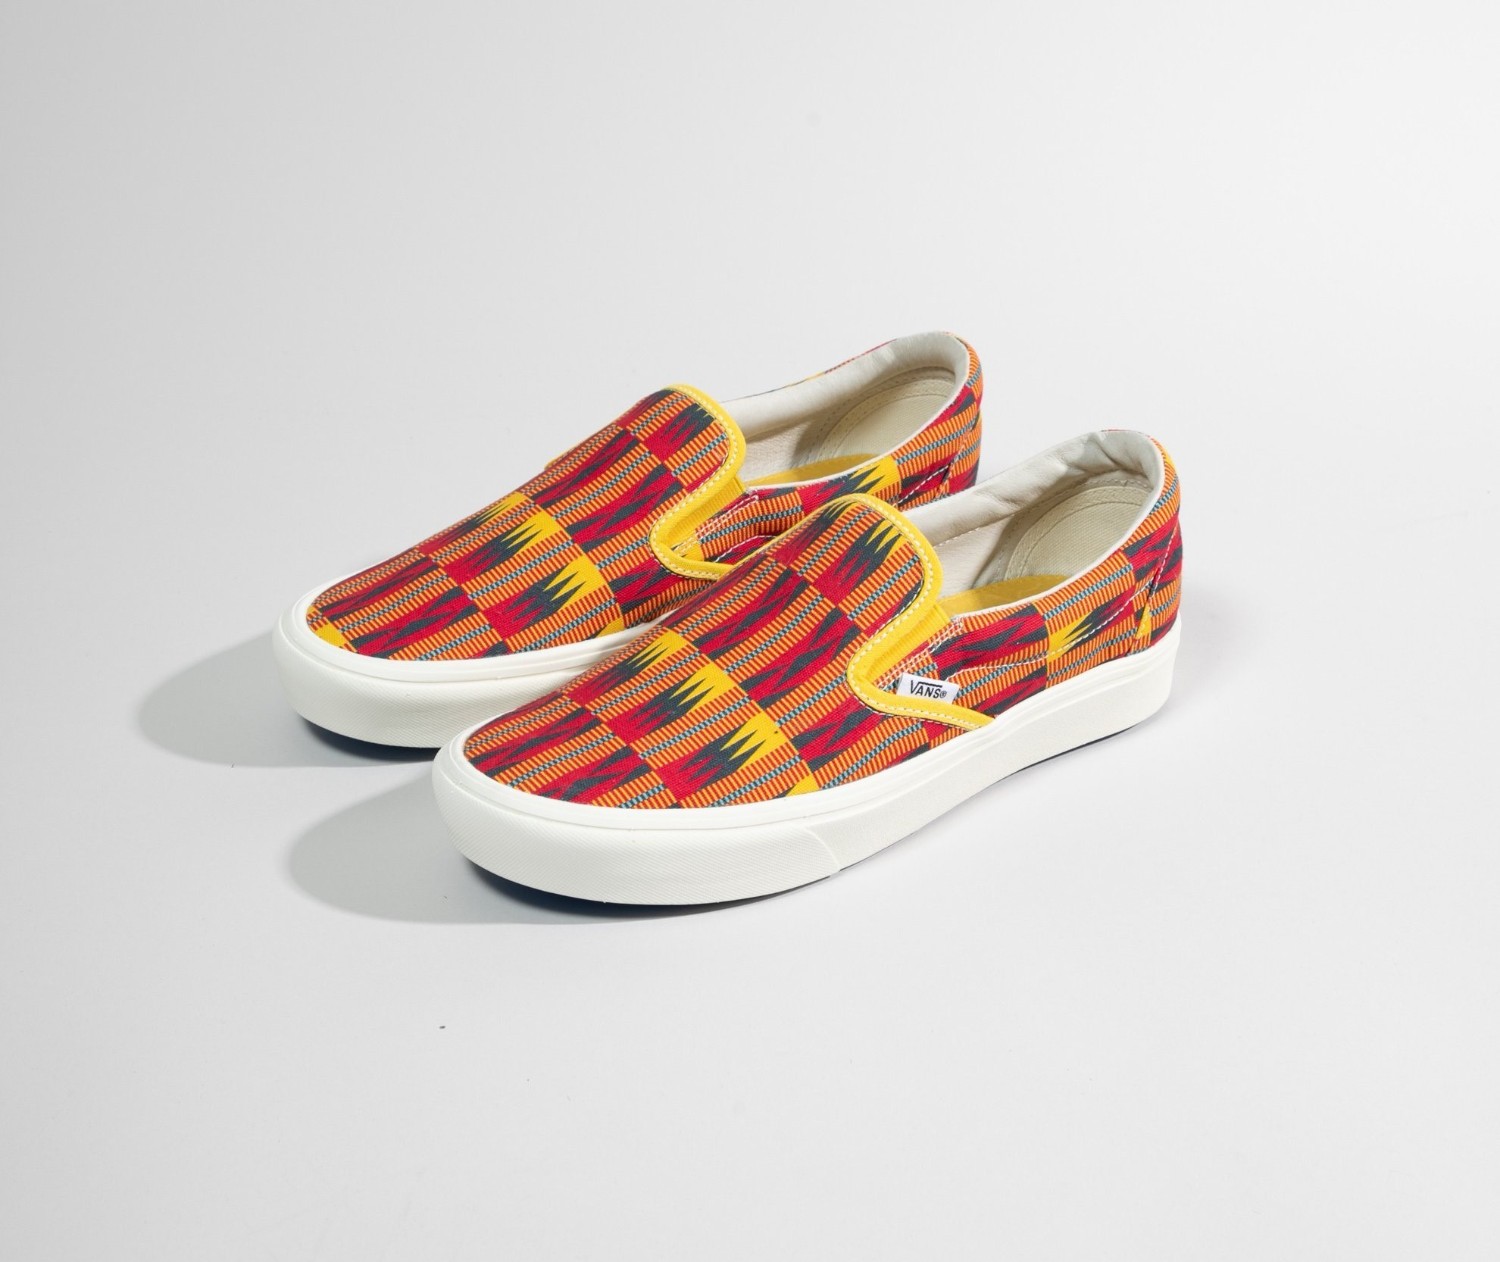 Union Los Angeles Teams Up With Vans For ComfyCush Kente Pack